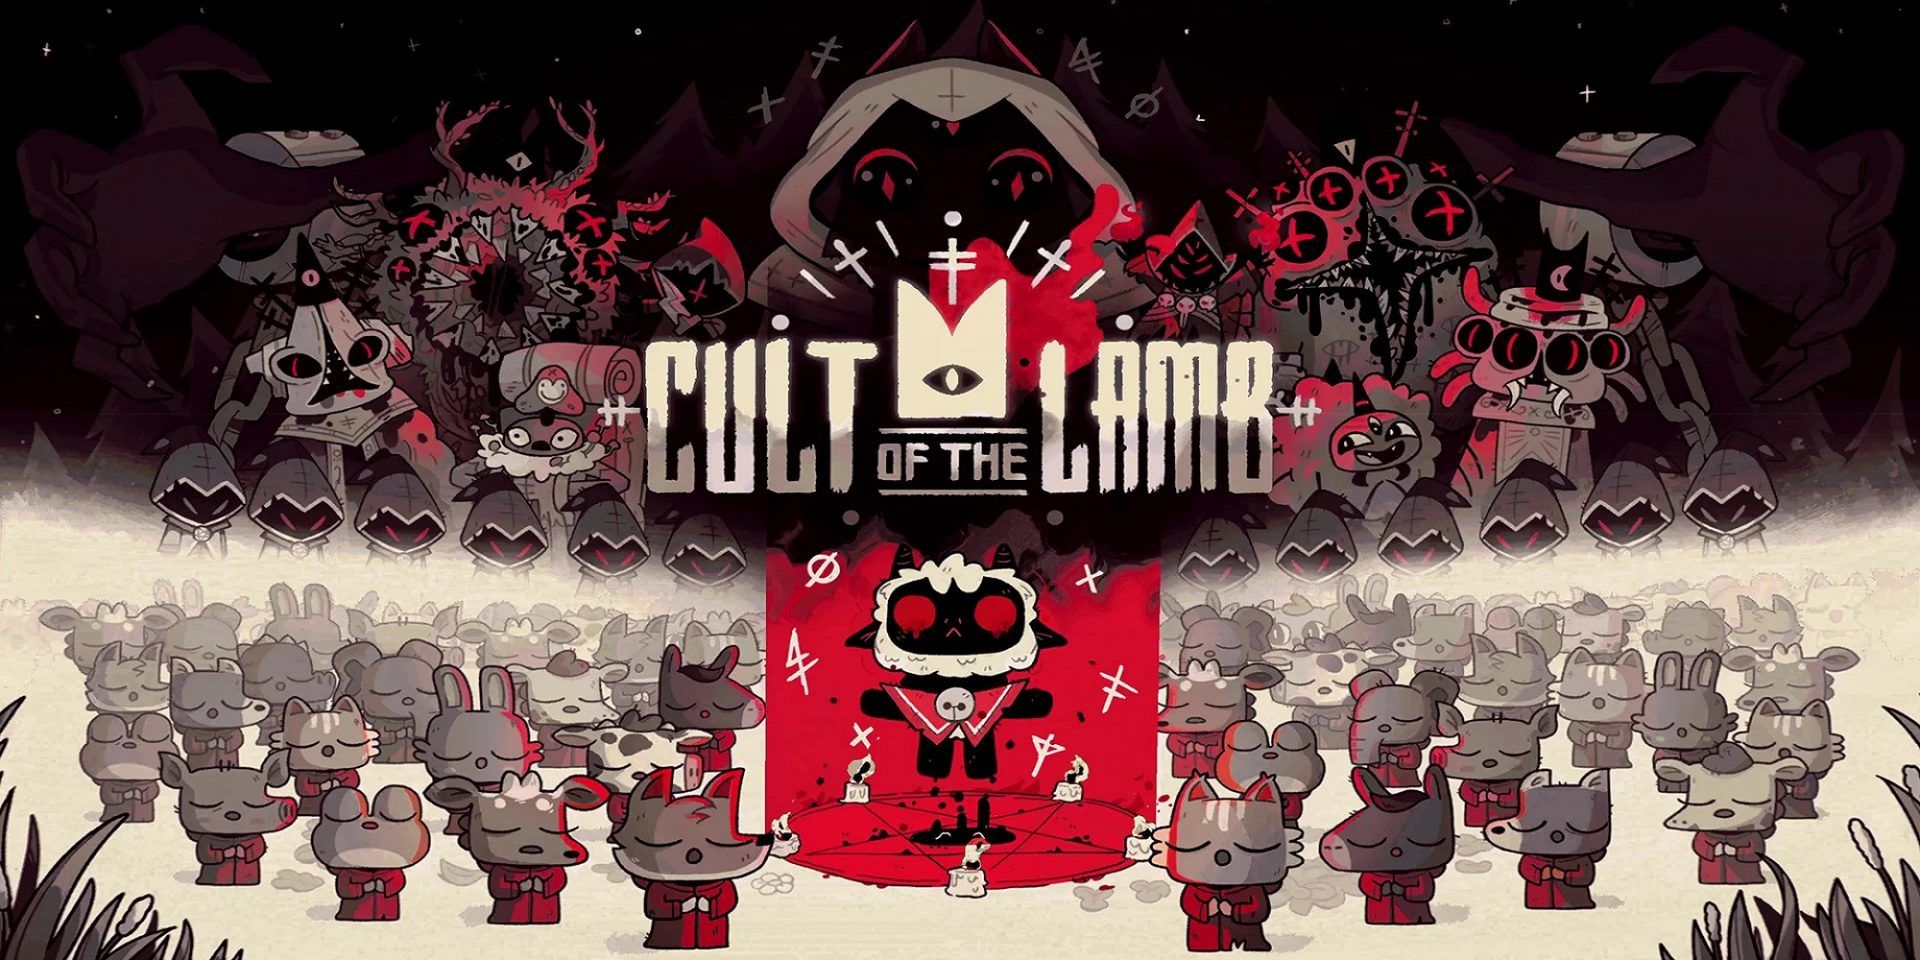 Cult of the lamb release time